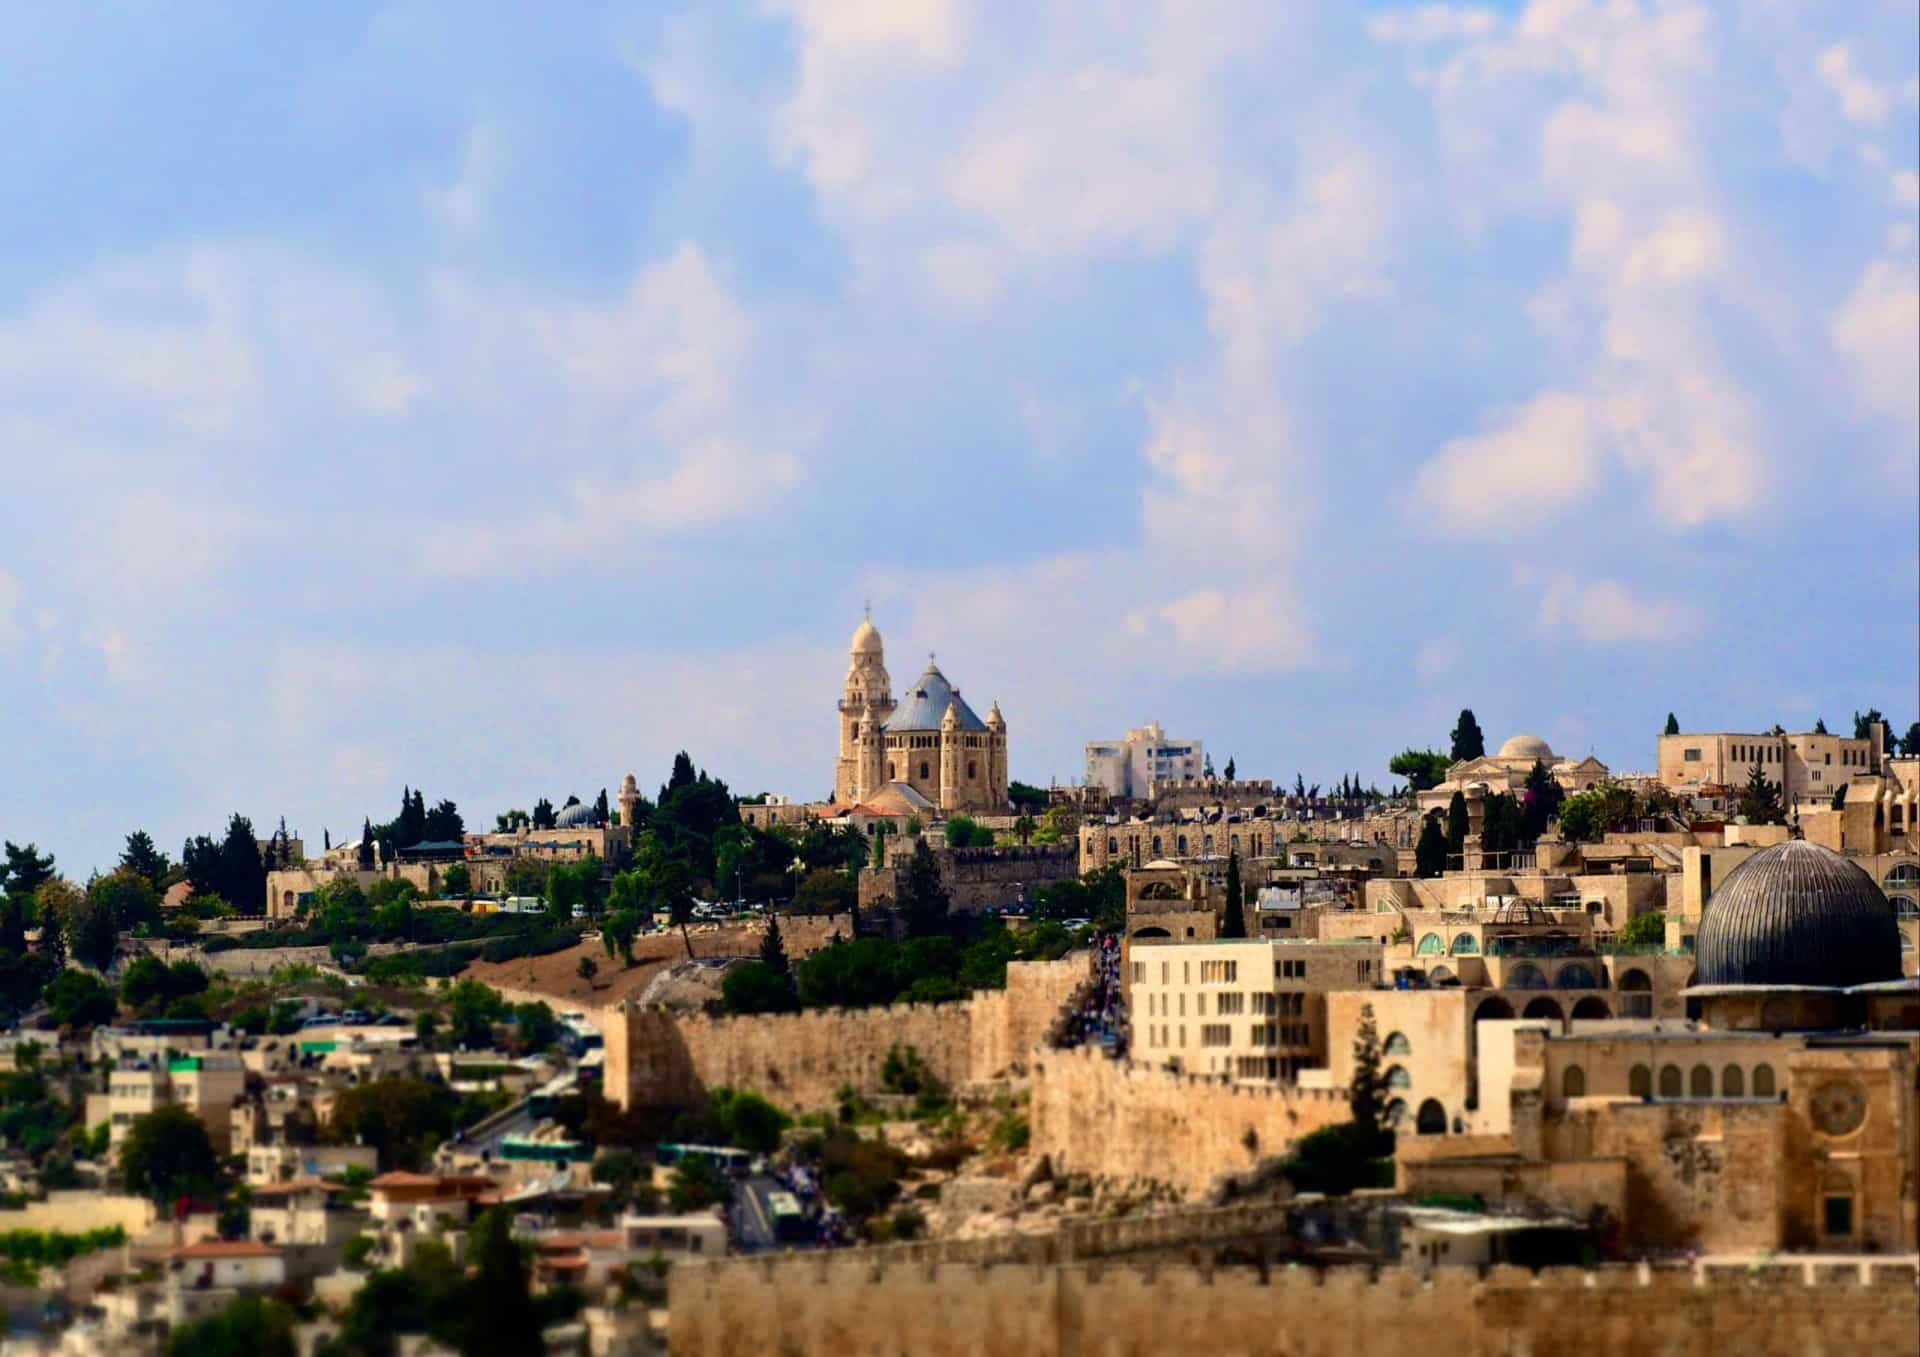 <p>Important sites on Mount Zion in Jerusalem include the Abbey of Dormition (pictured)—said to mark the spot where Mary, mother of Jesus, died—and King David's Tomb. The Cenacle, better known as the Room of the Last Supper, is also located here.</p>